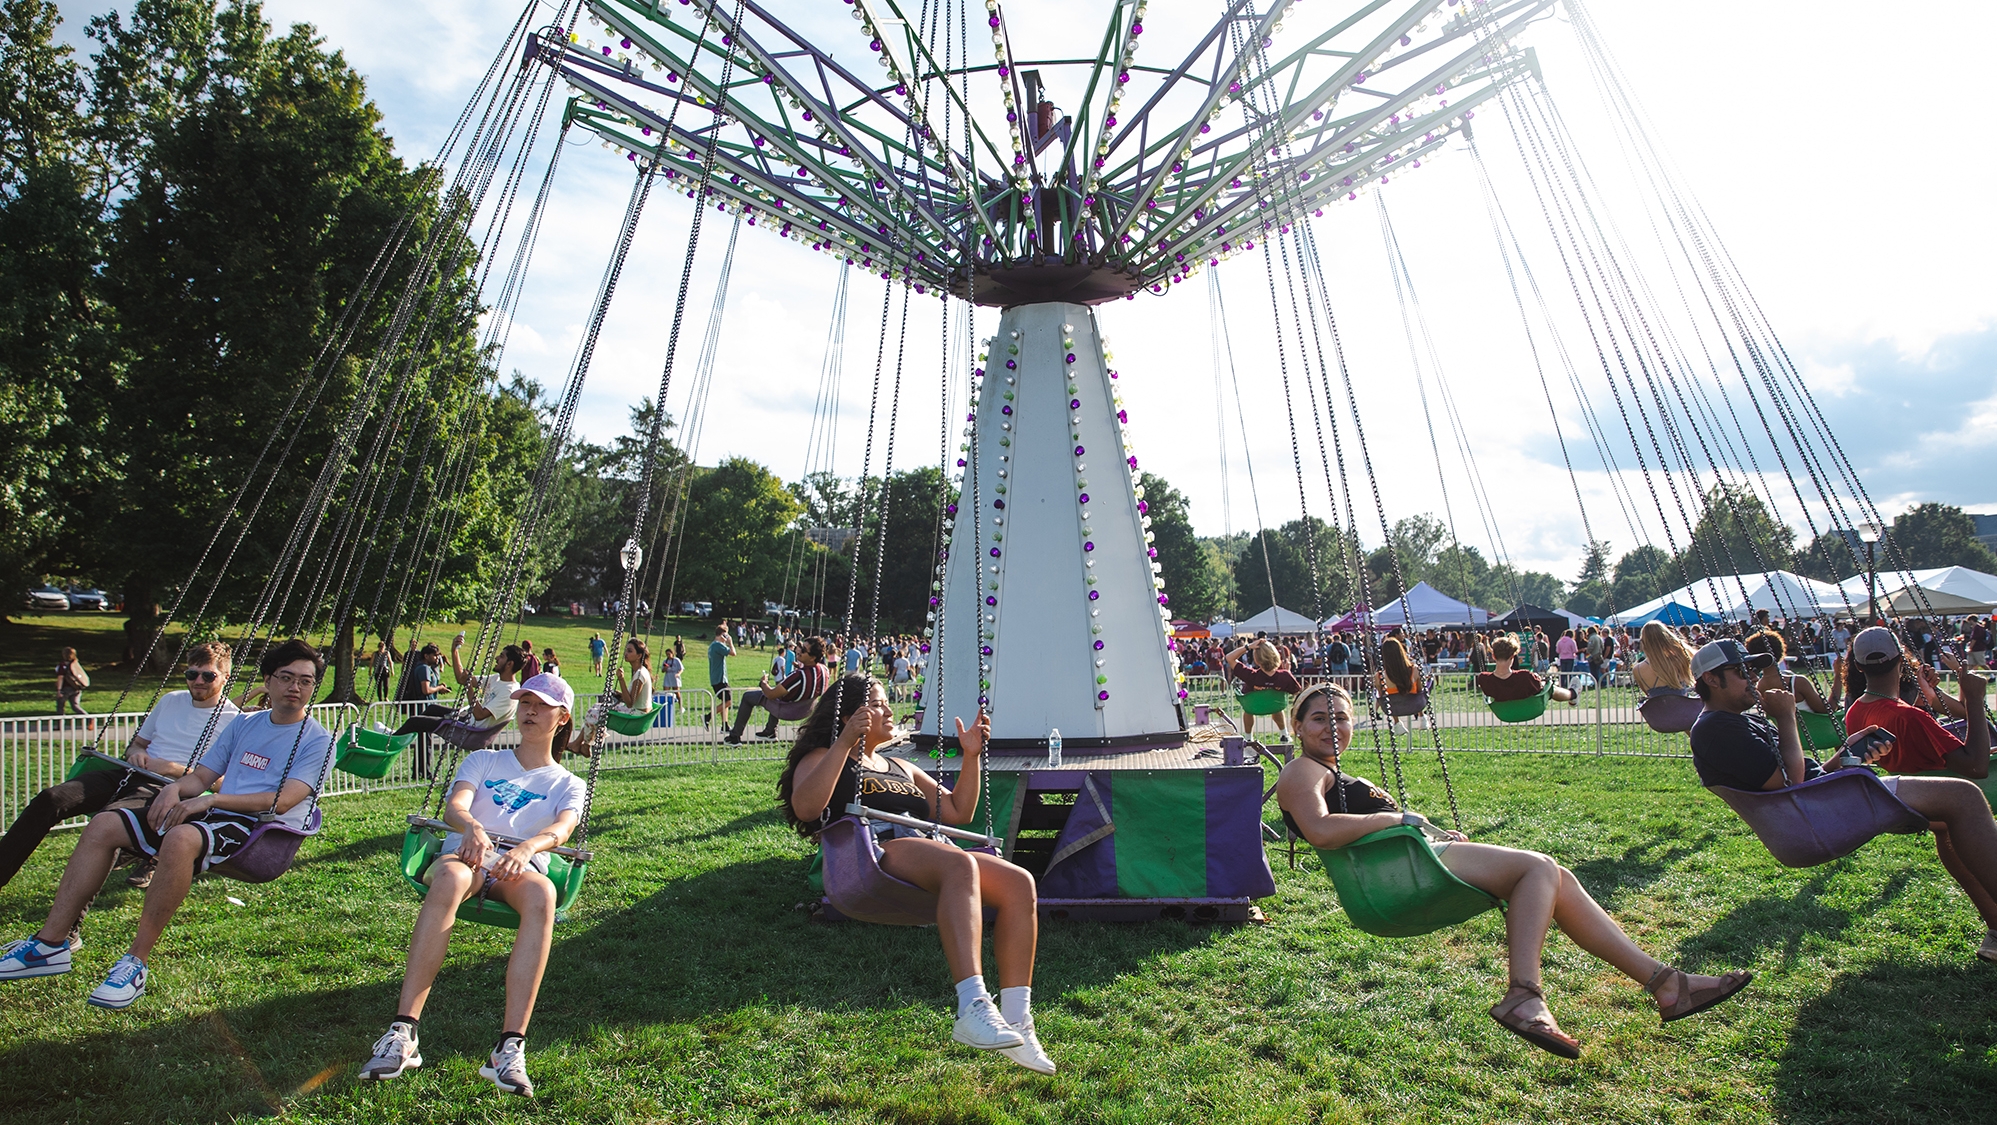 Students on a swing ride at Gobblerfest